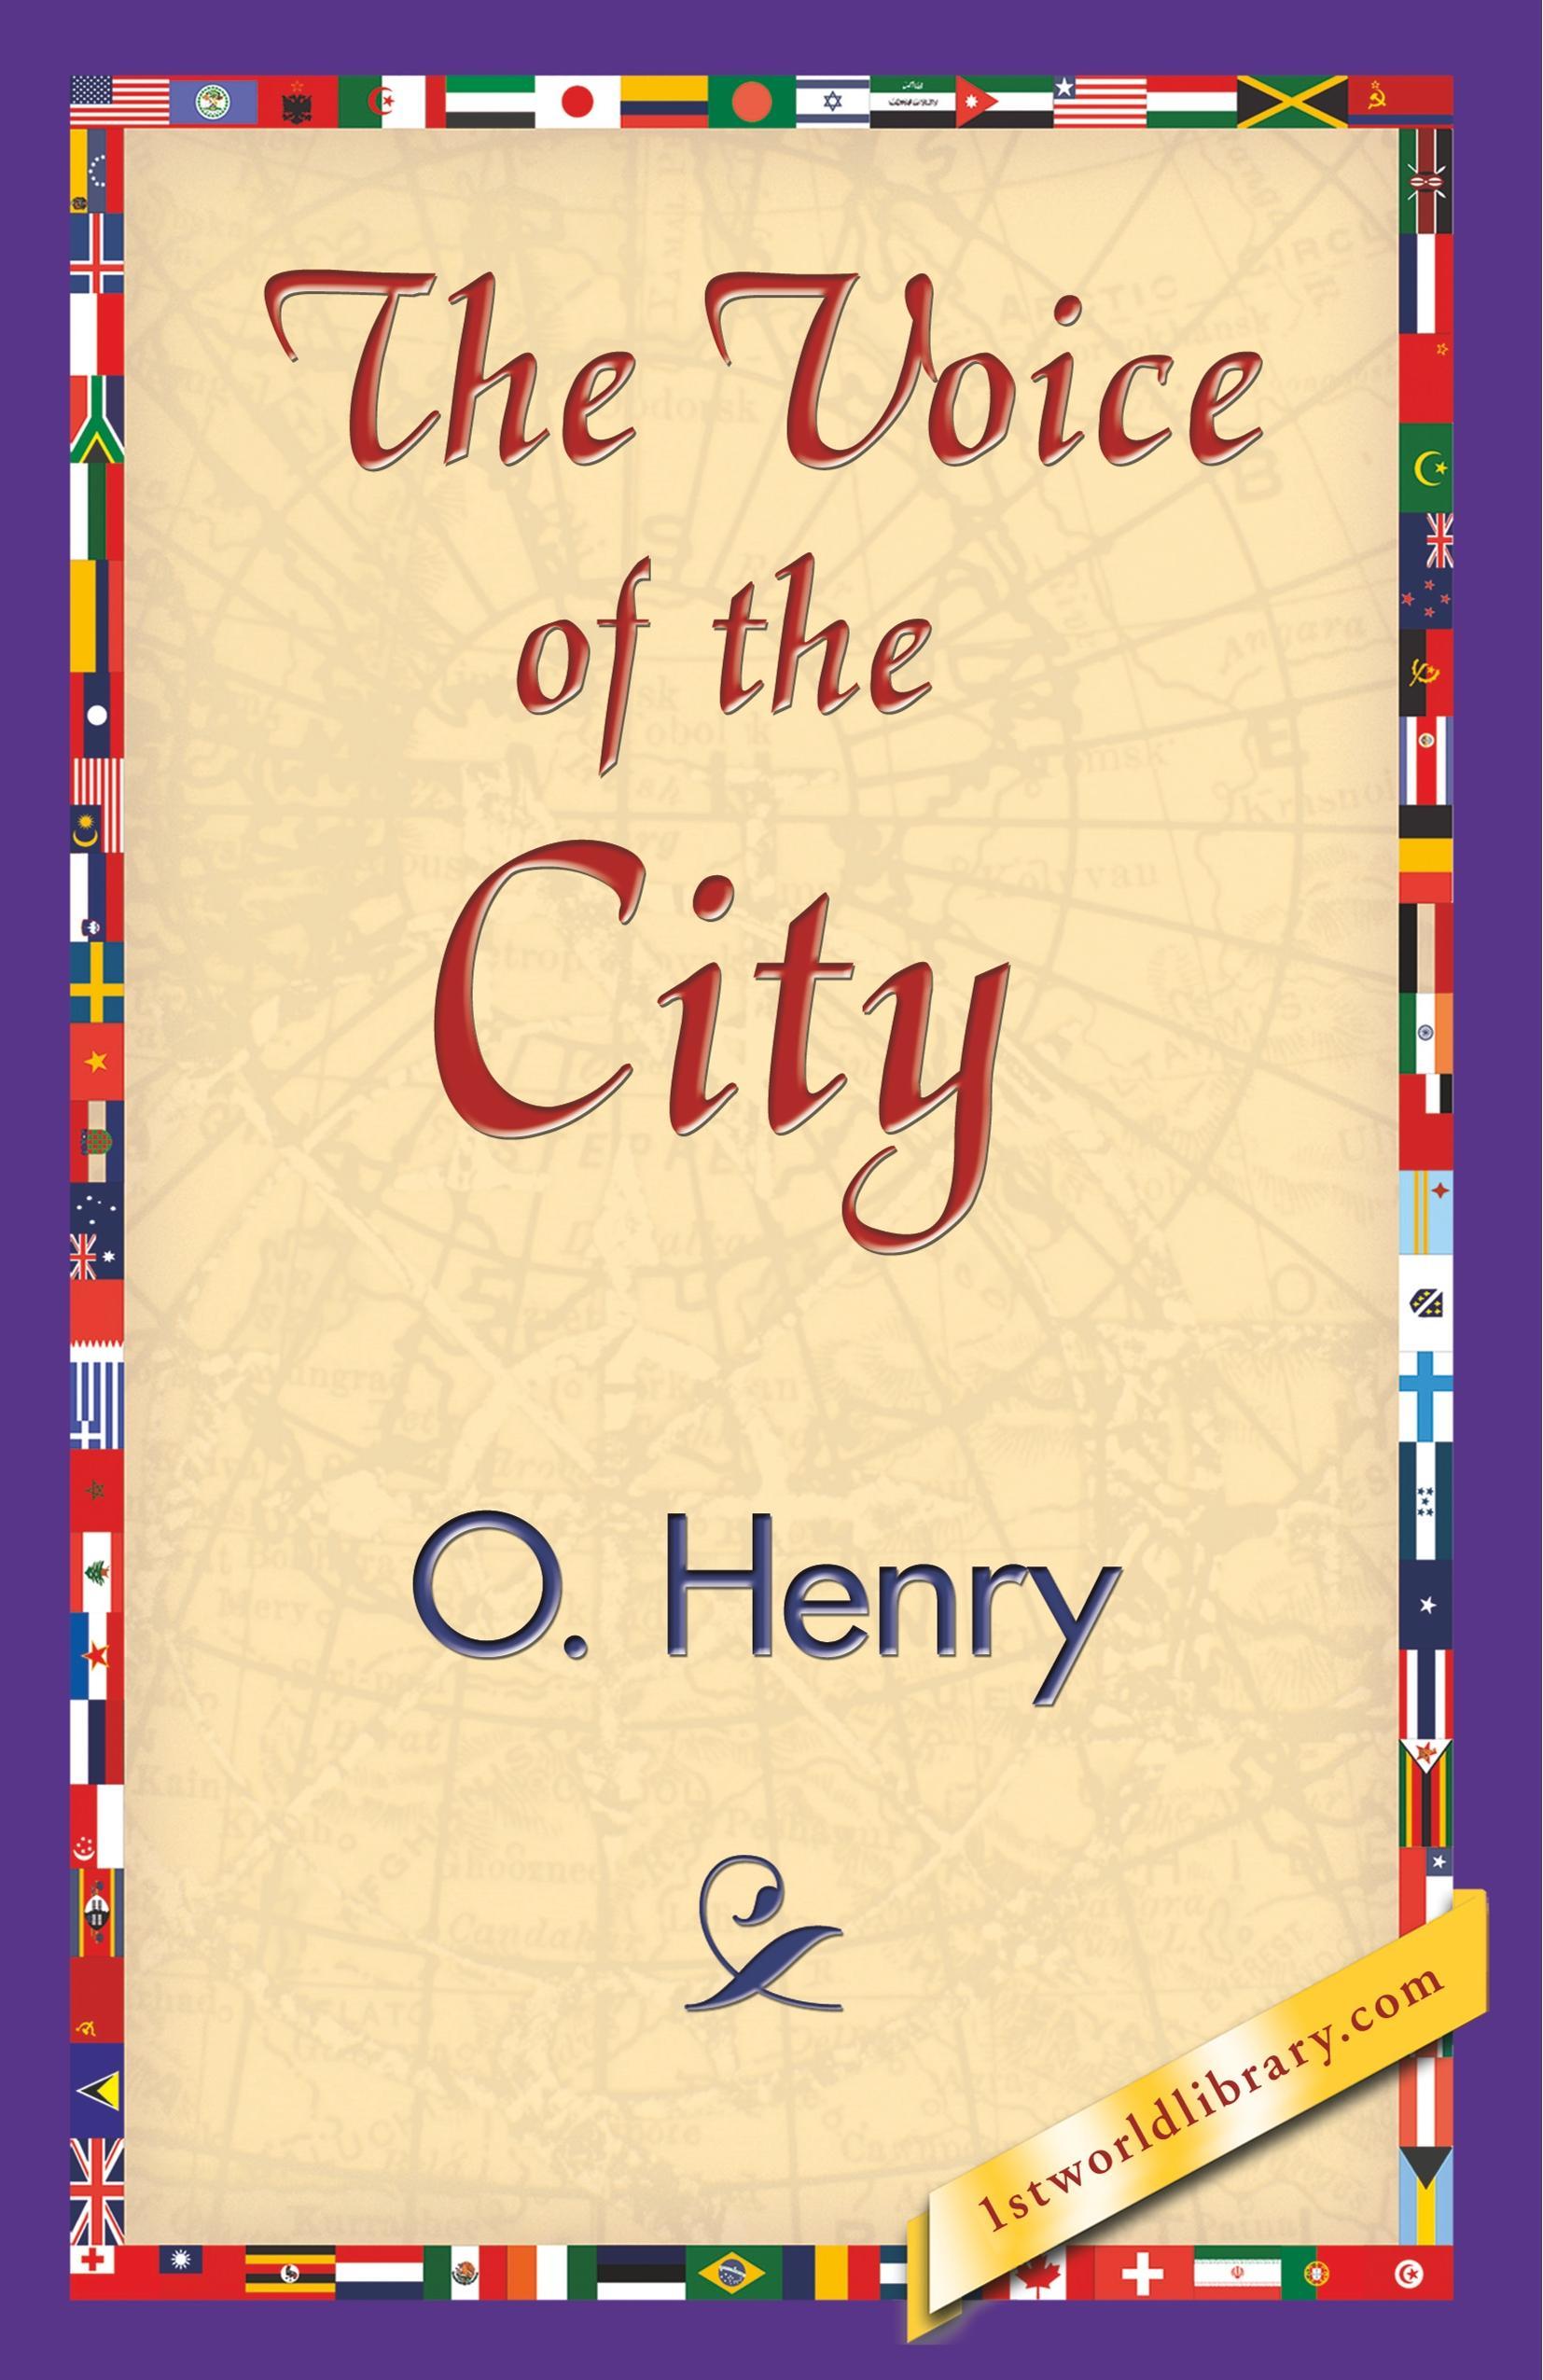 The Voice of the City - O Henry